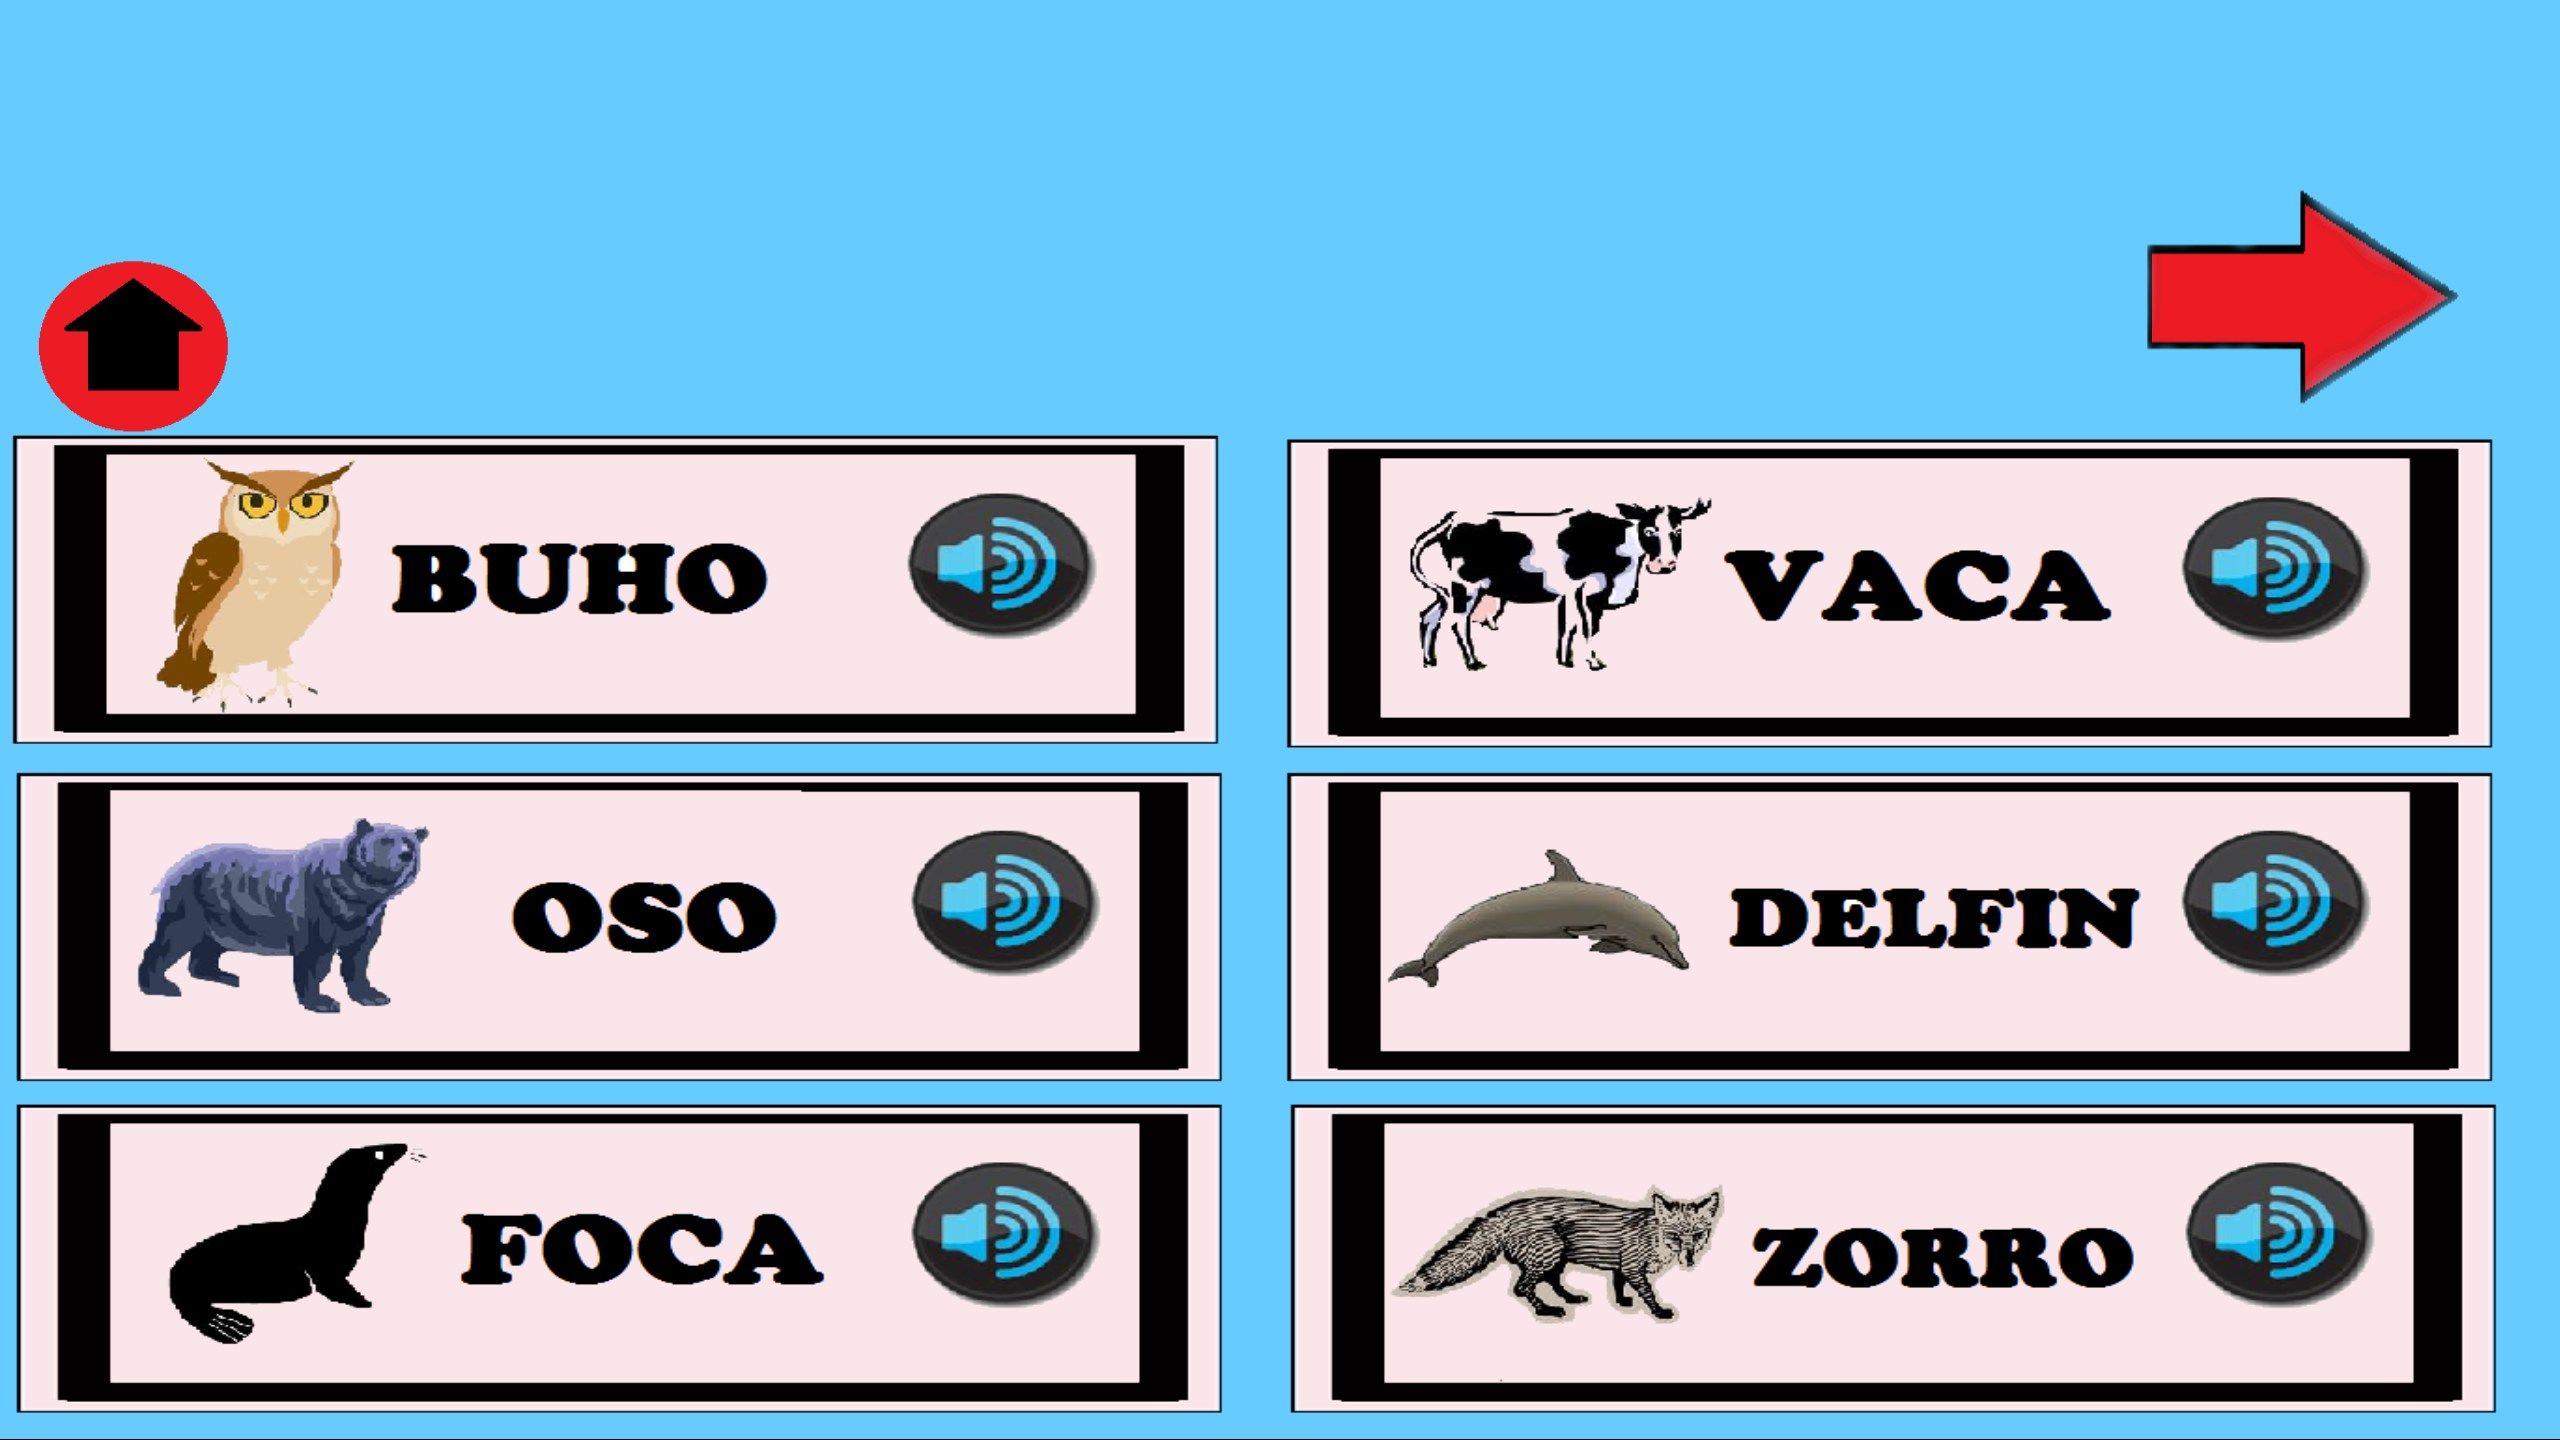 This is one of the Another layout of the game , with some of the animals